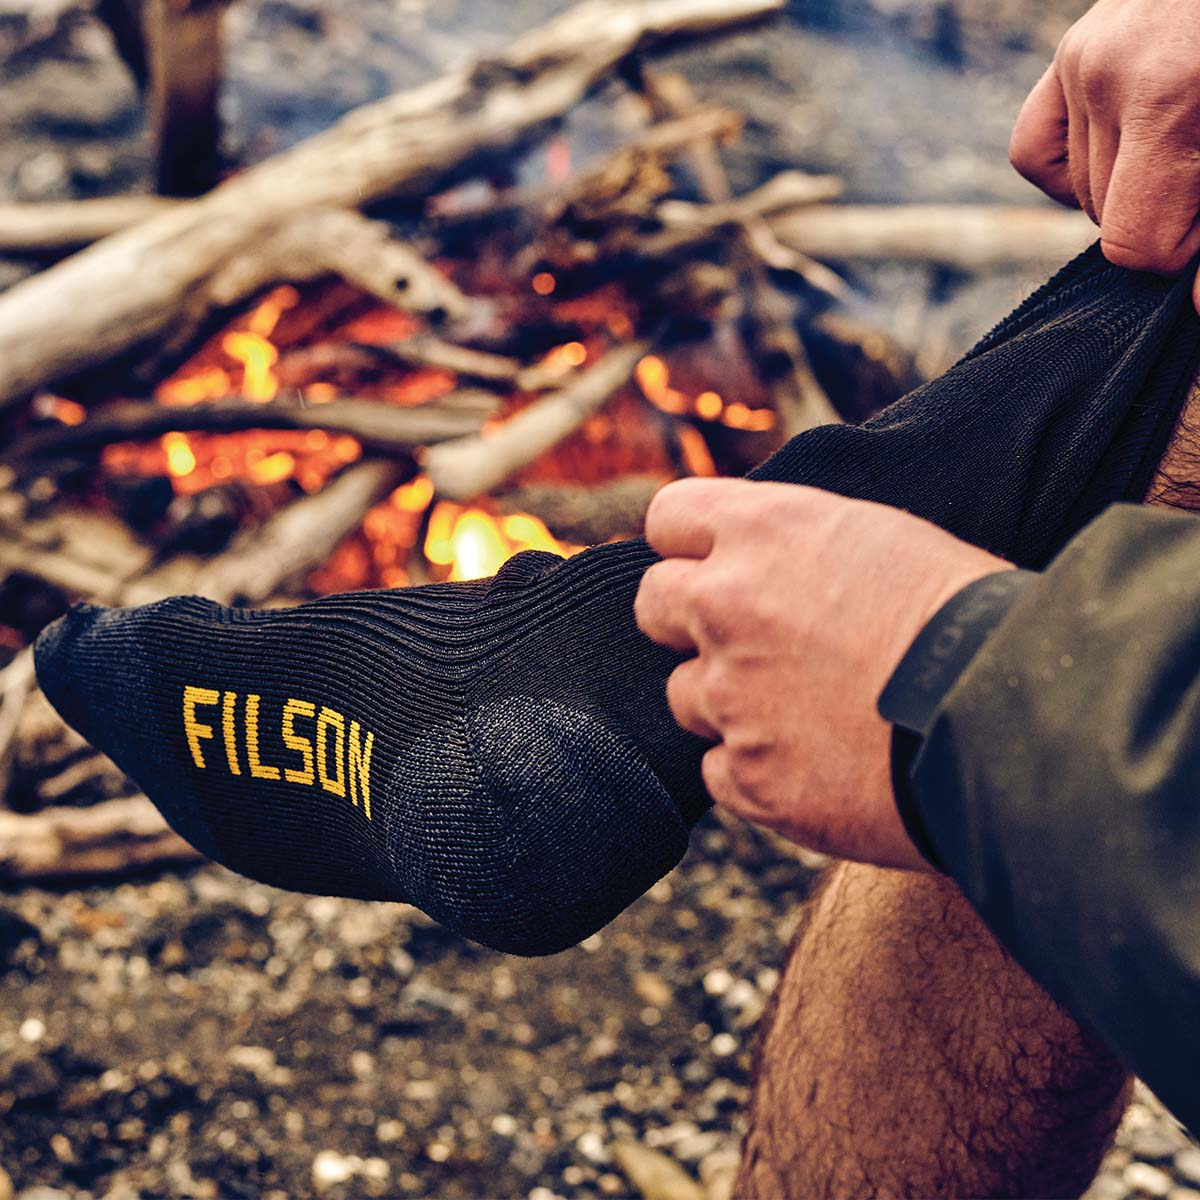 Filson Midweight Technical Boot Socks, Midweight blend of performance and durability.